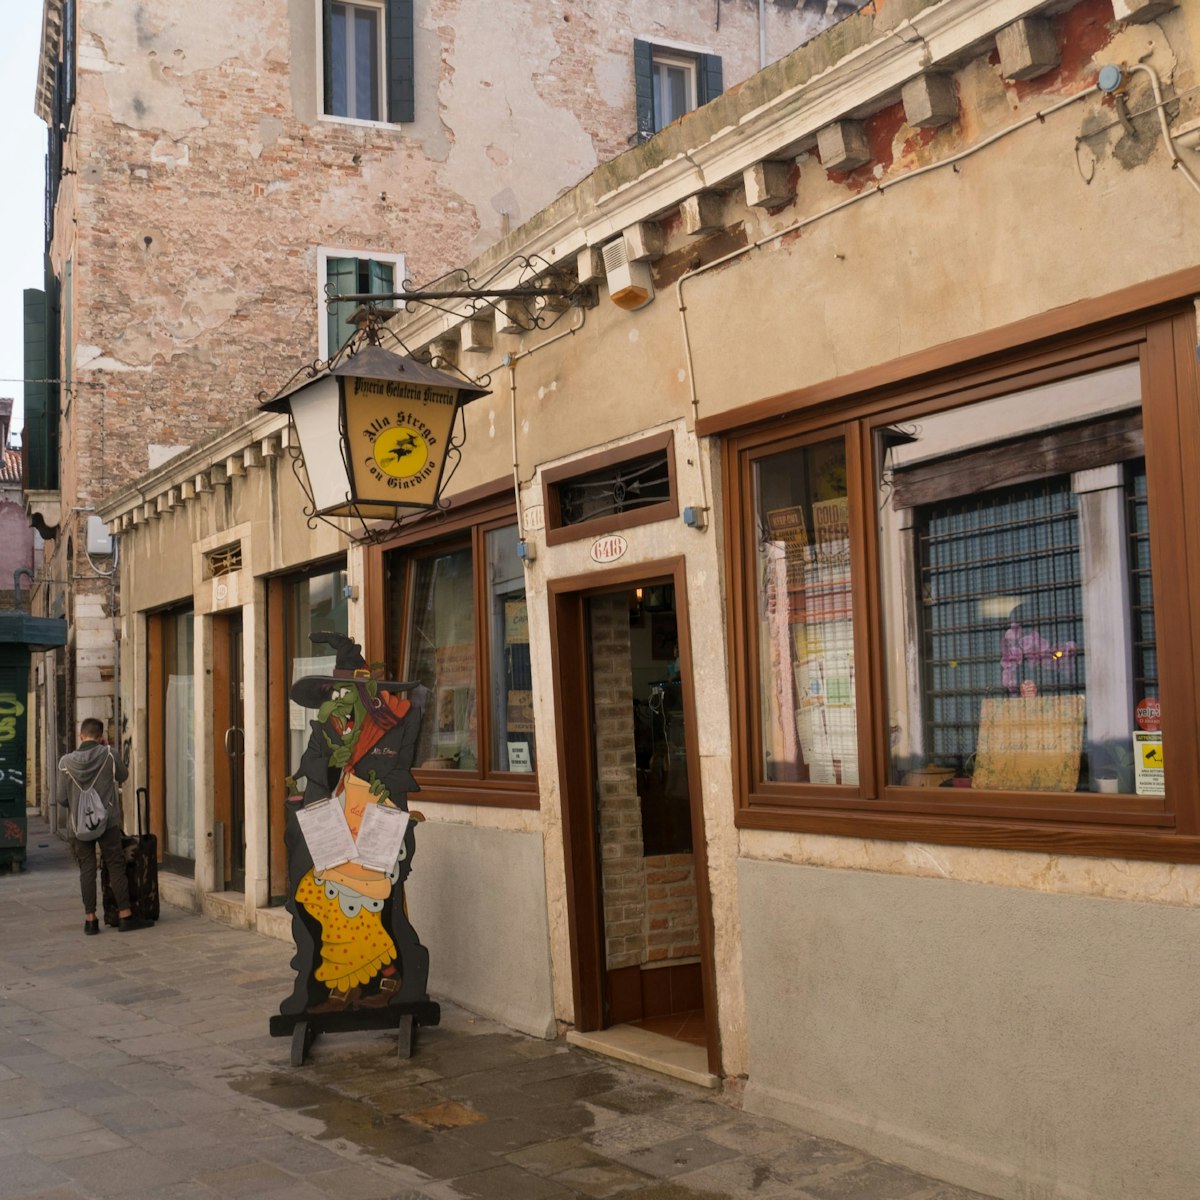 The entrance to the pizzeria on busy Barbaria de le Tole